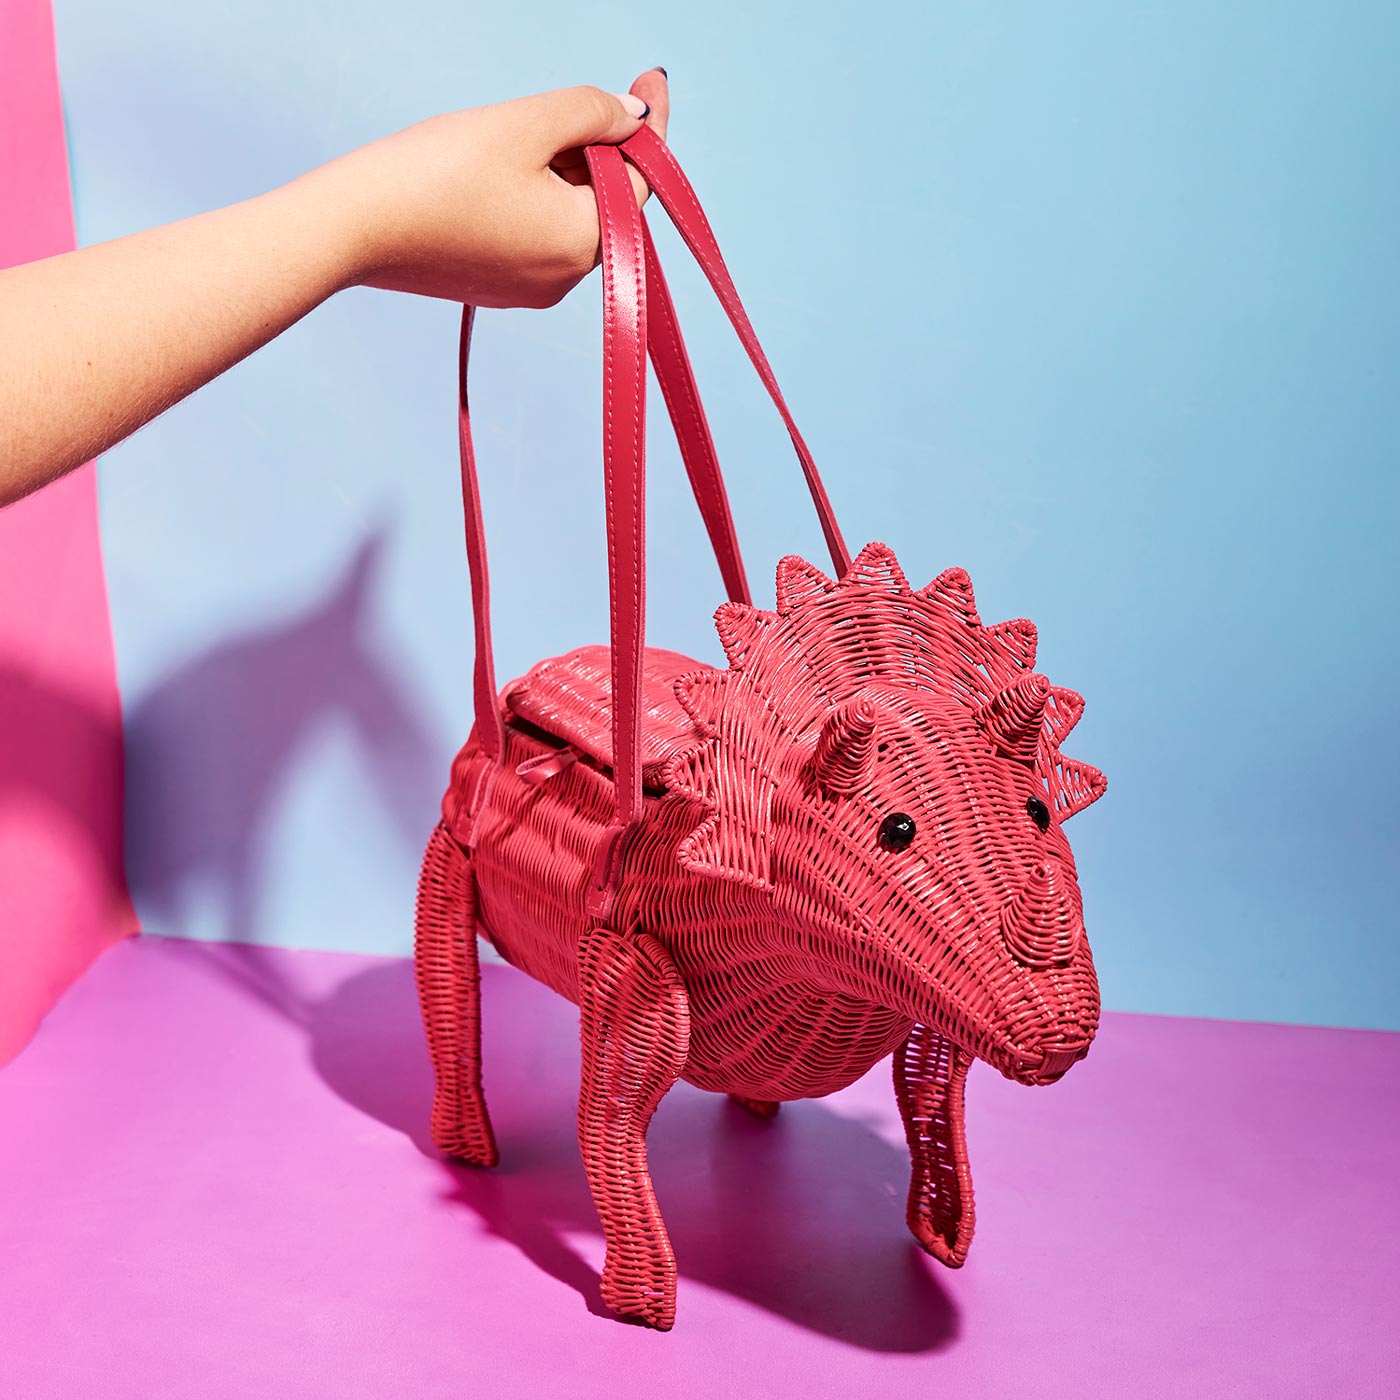 Kate Spade's T-rex bag is the hottest purse for summer | CafeMom.com